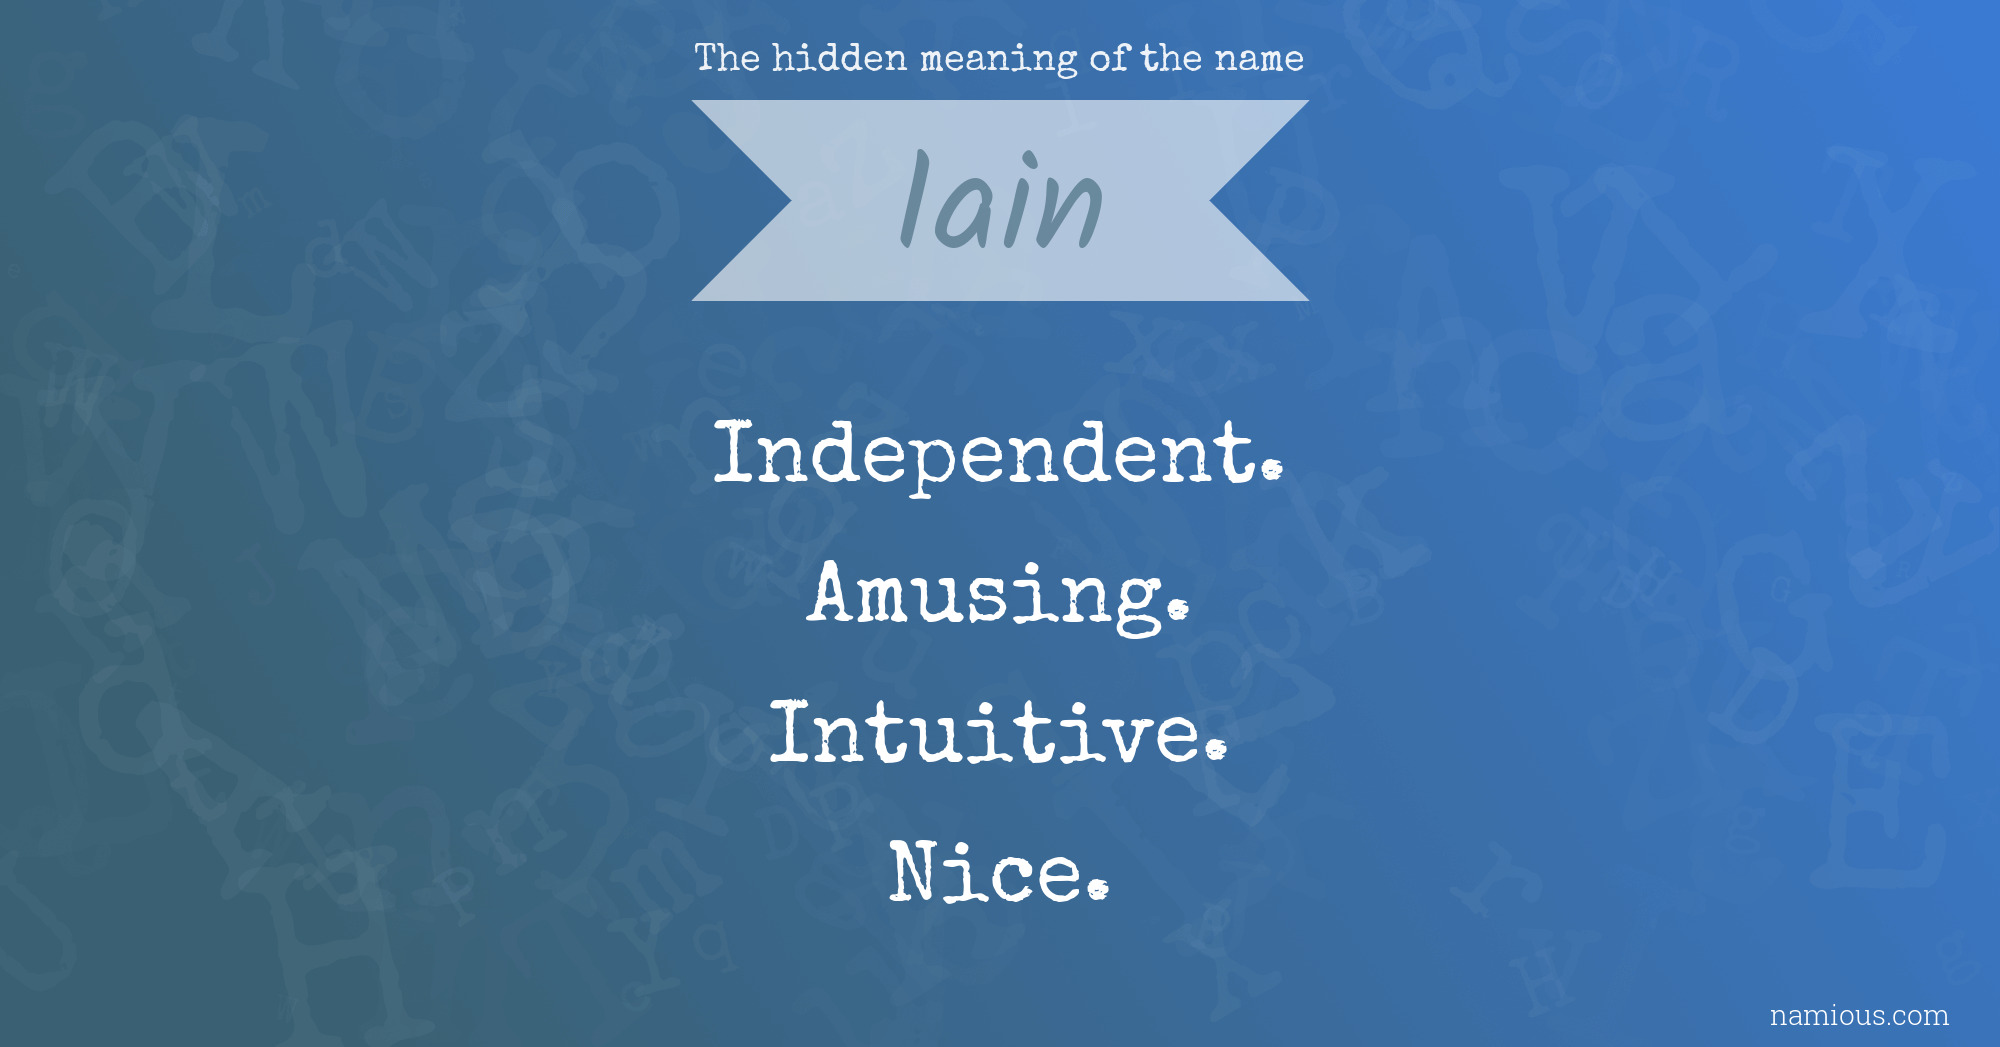 The hidden meaning of the name Iain